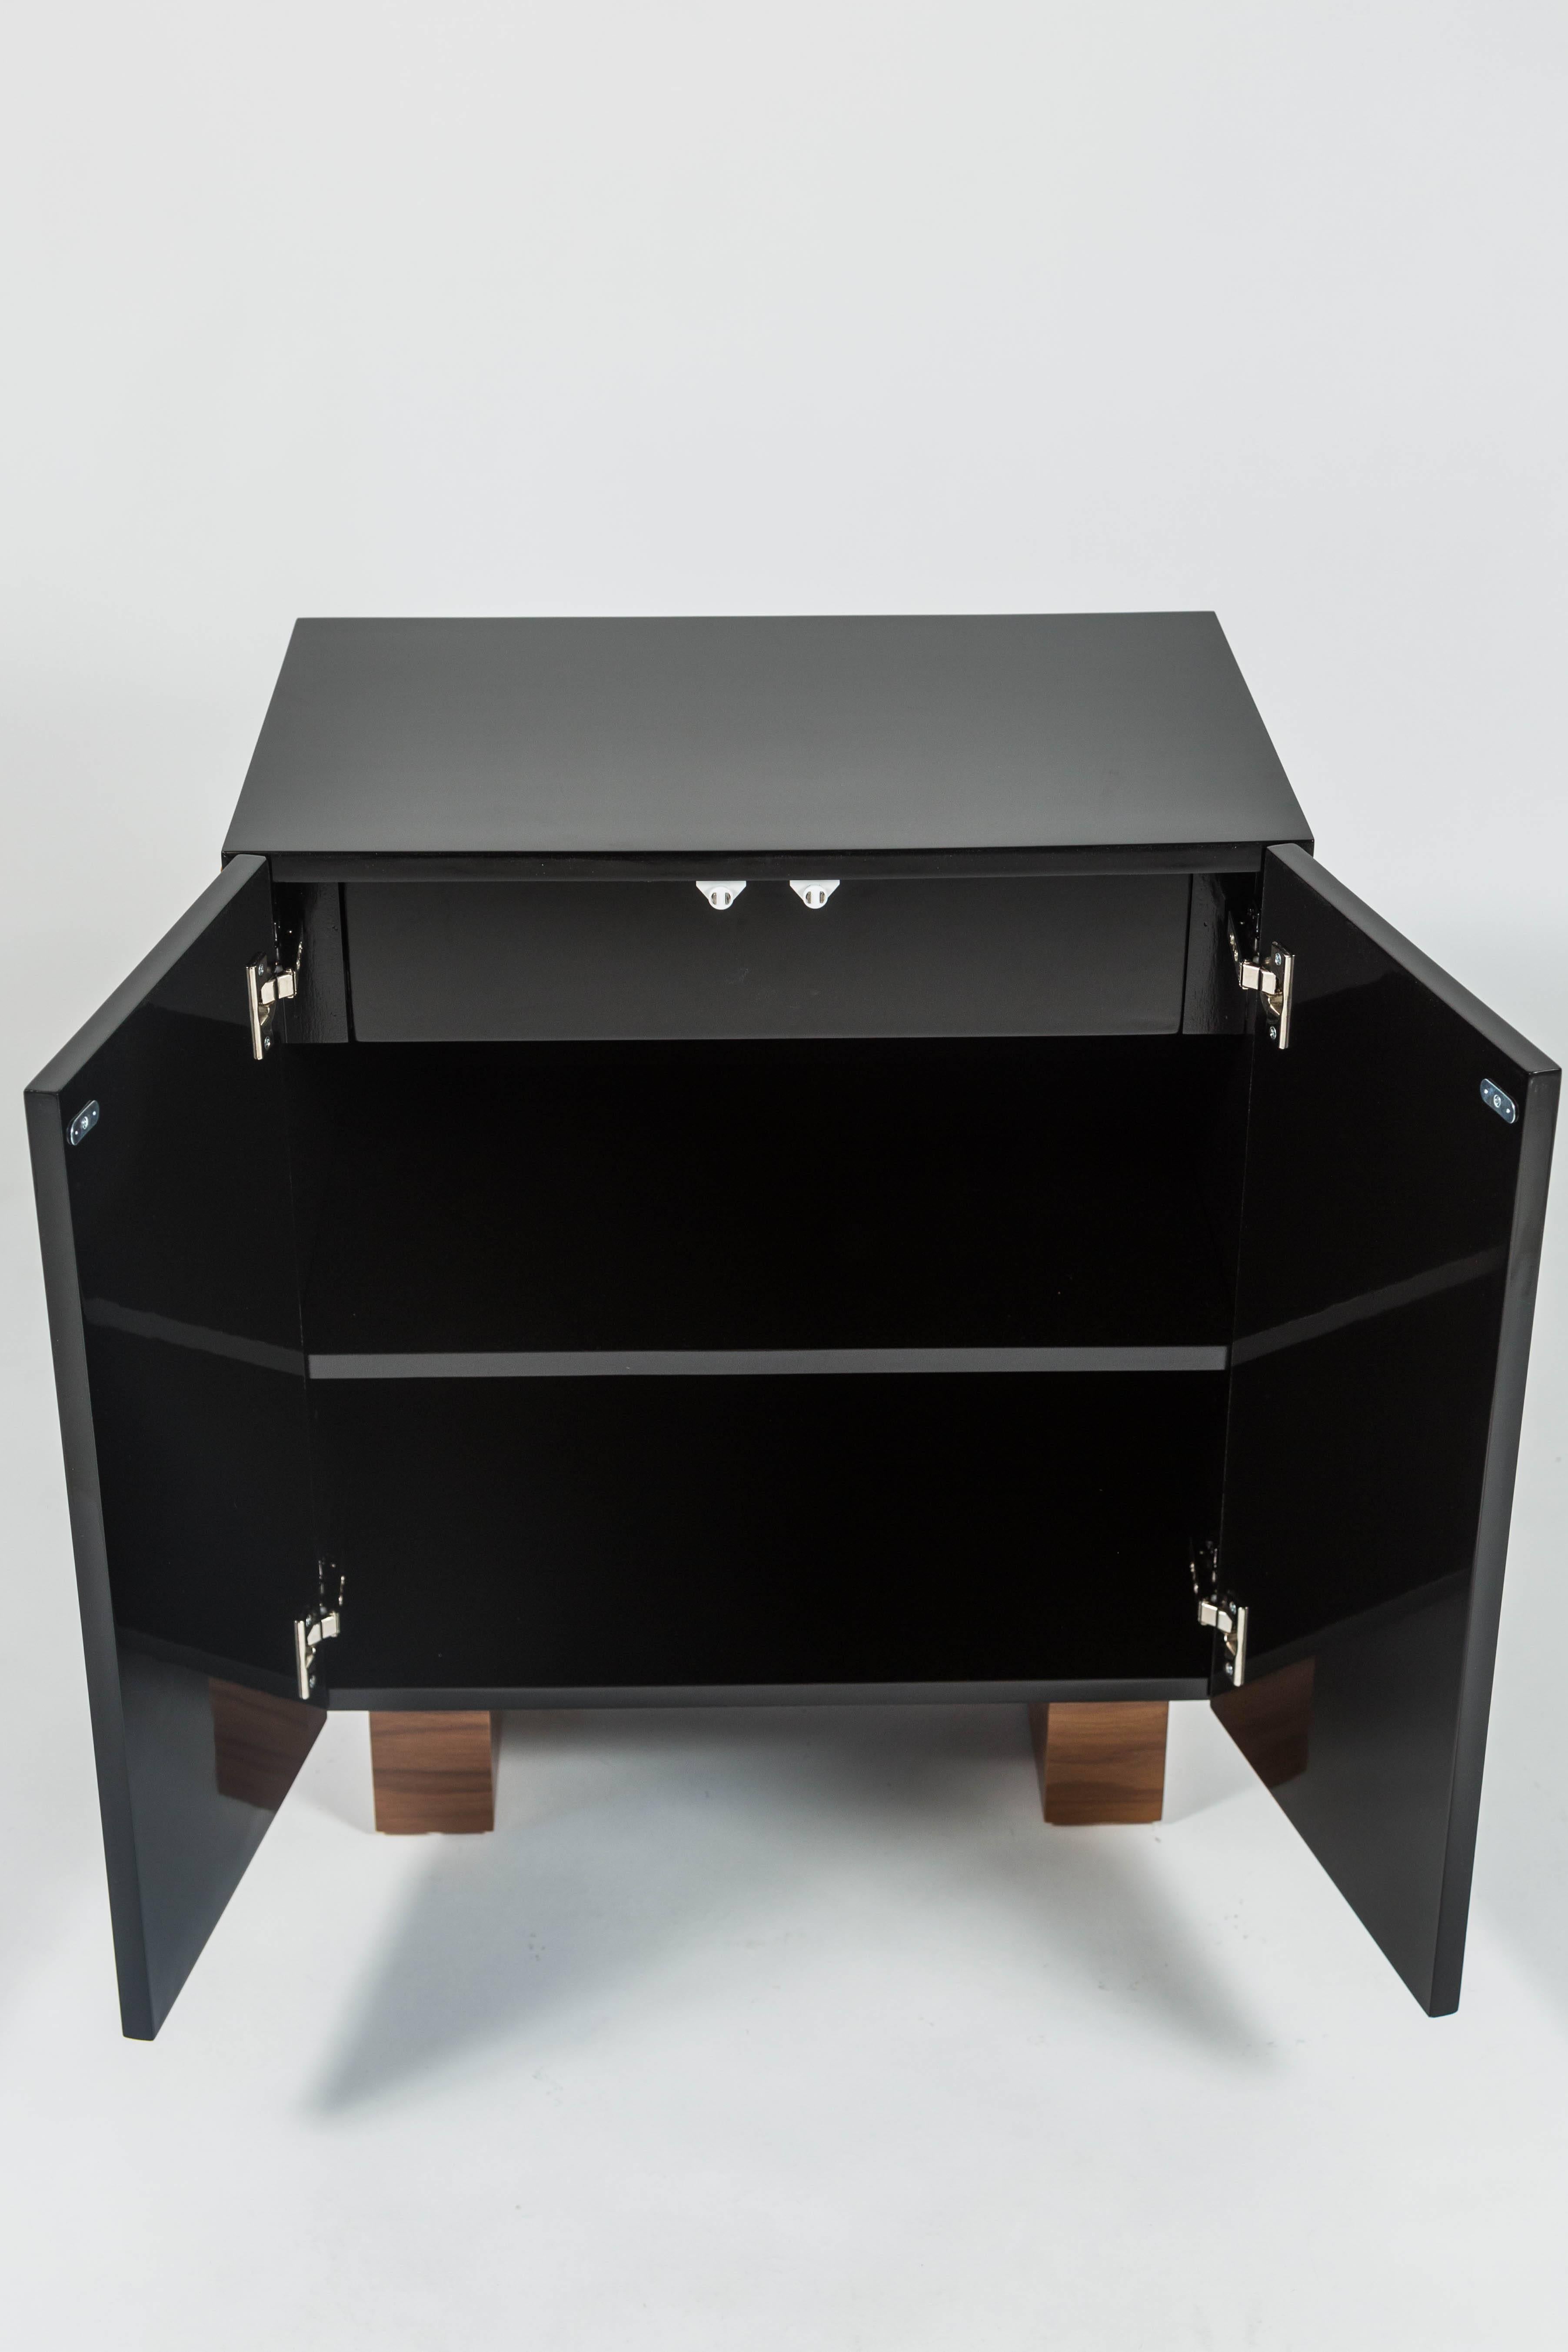 This chic cabinet in black lacquer studded with tigers eye cabochons and with walnut stained feet was designed by Patrick Dragonette for Dragonette Private Label. Featuring touch latch doors the cabinet houses a single drawer inside. This cabinet